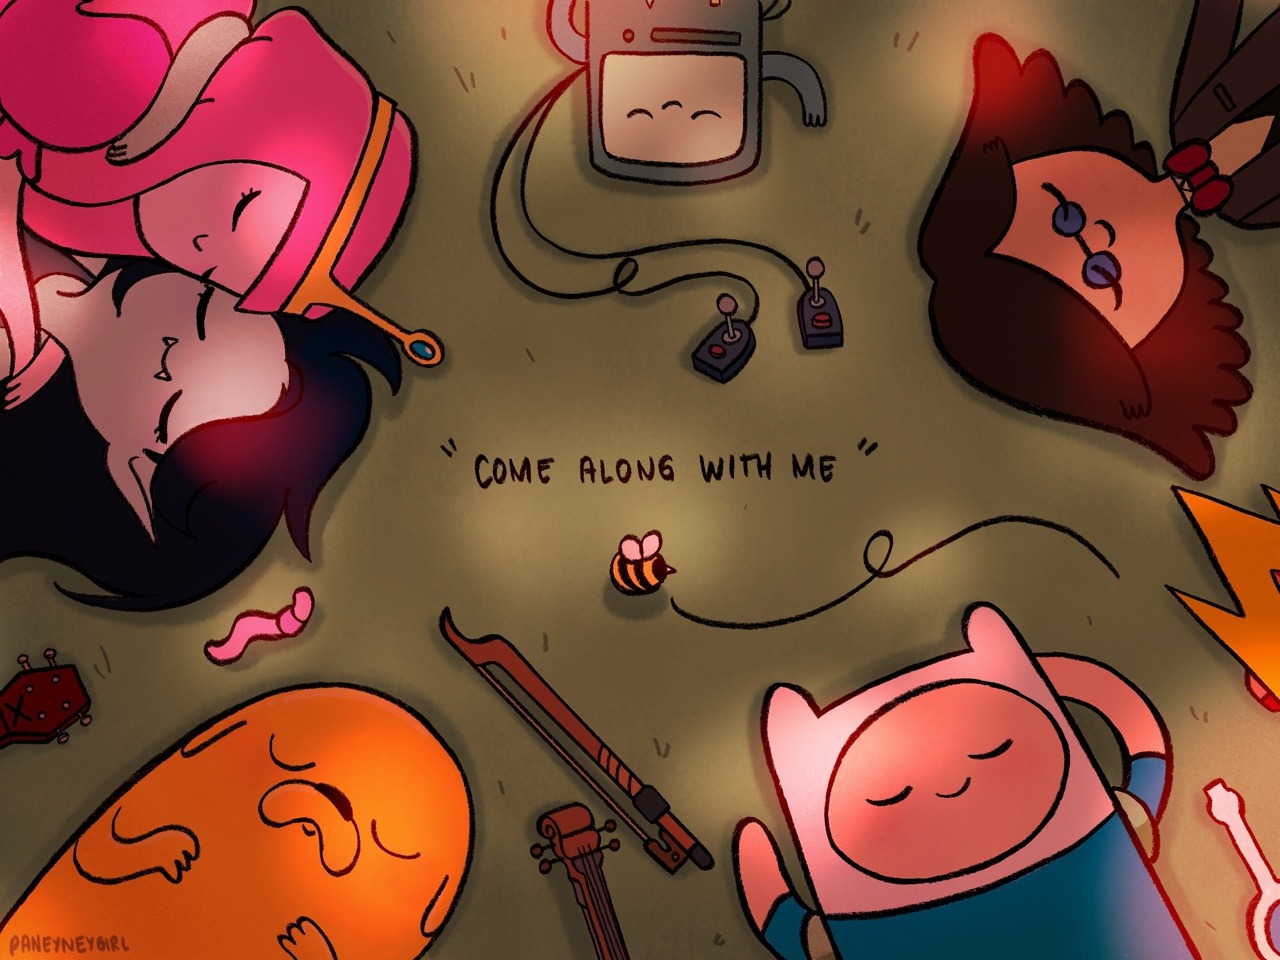 paneyneygirl: A tribute to another great show that ended. Thanks for the great memories adventure time. One of my art inspirations and fave shows of all time.  